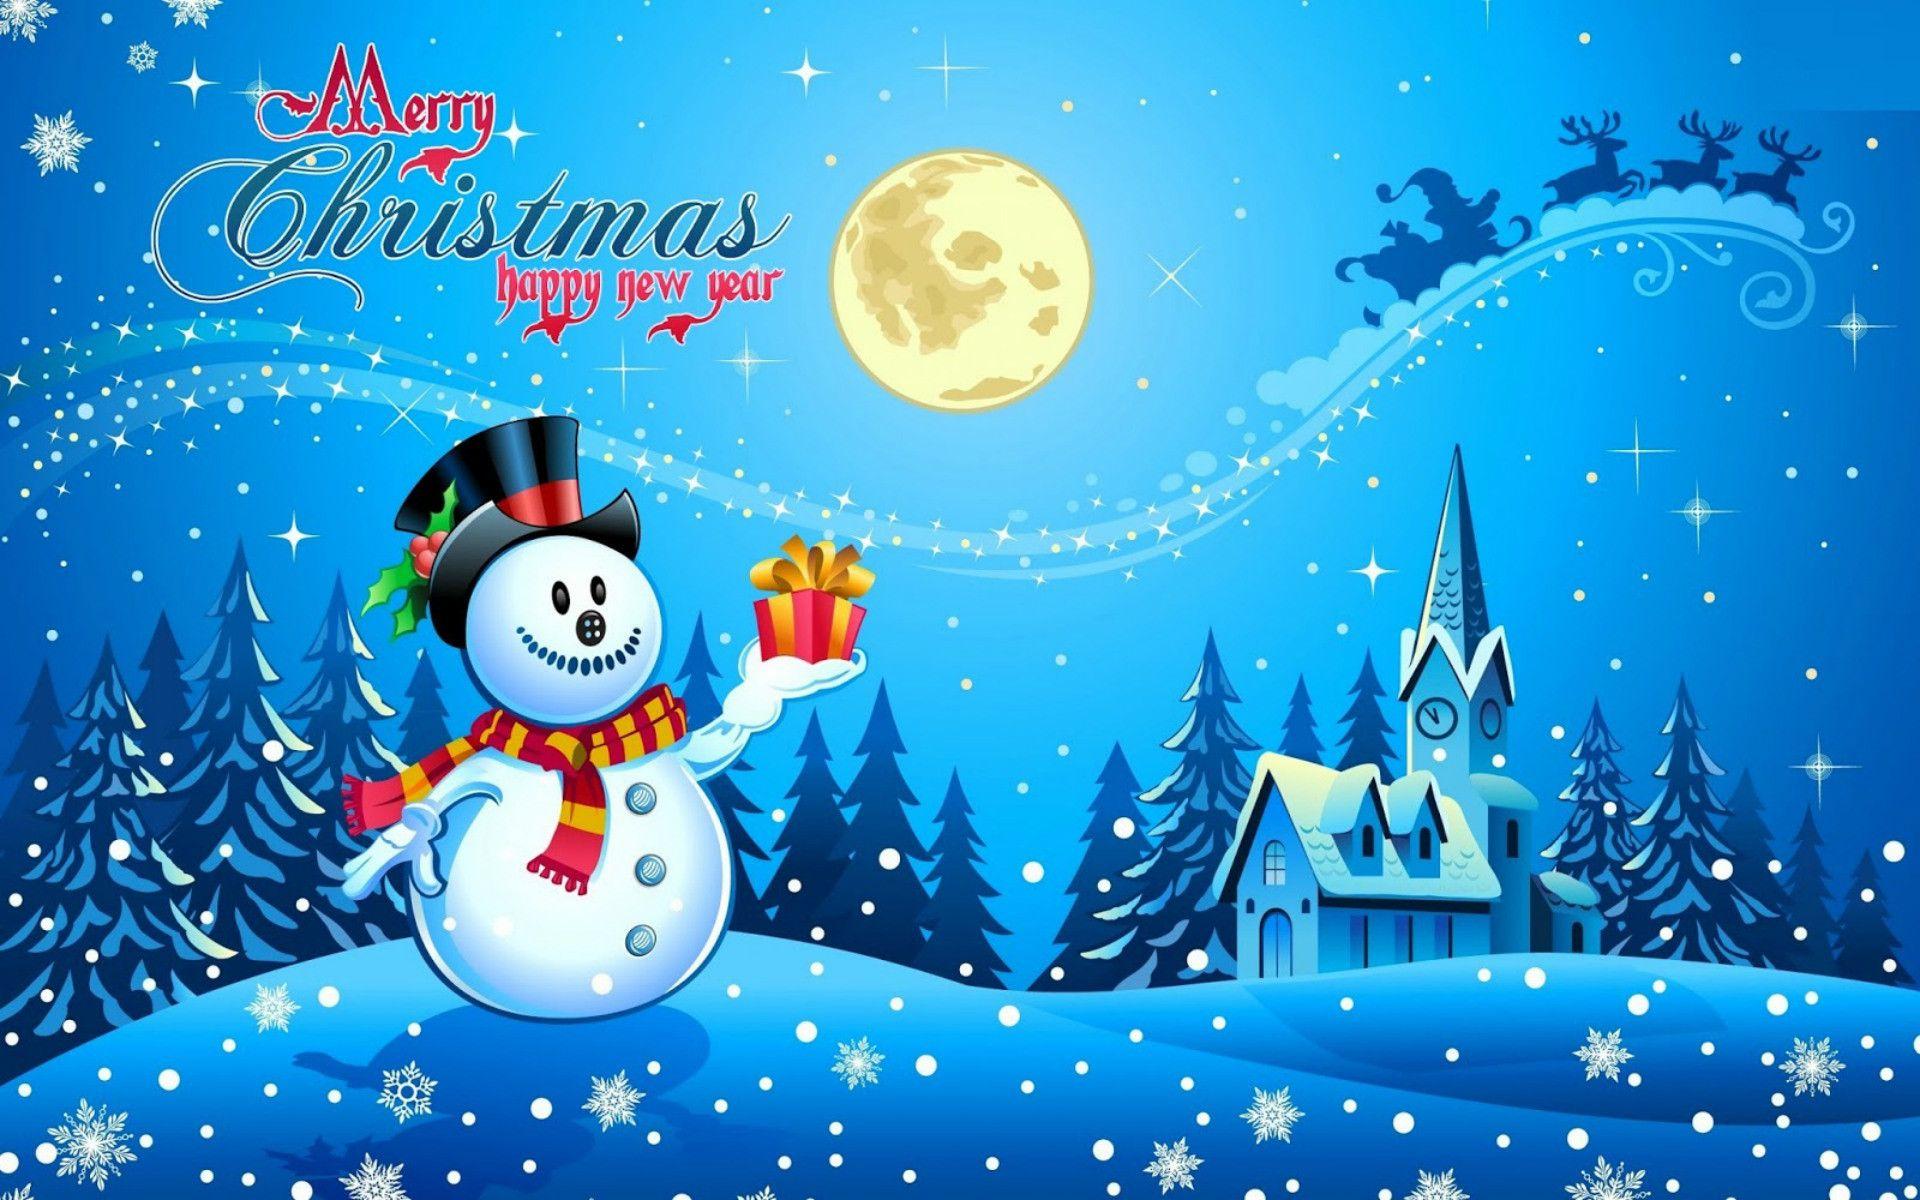 3D Christmas Background